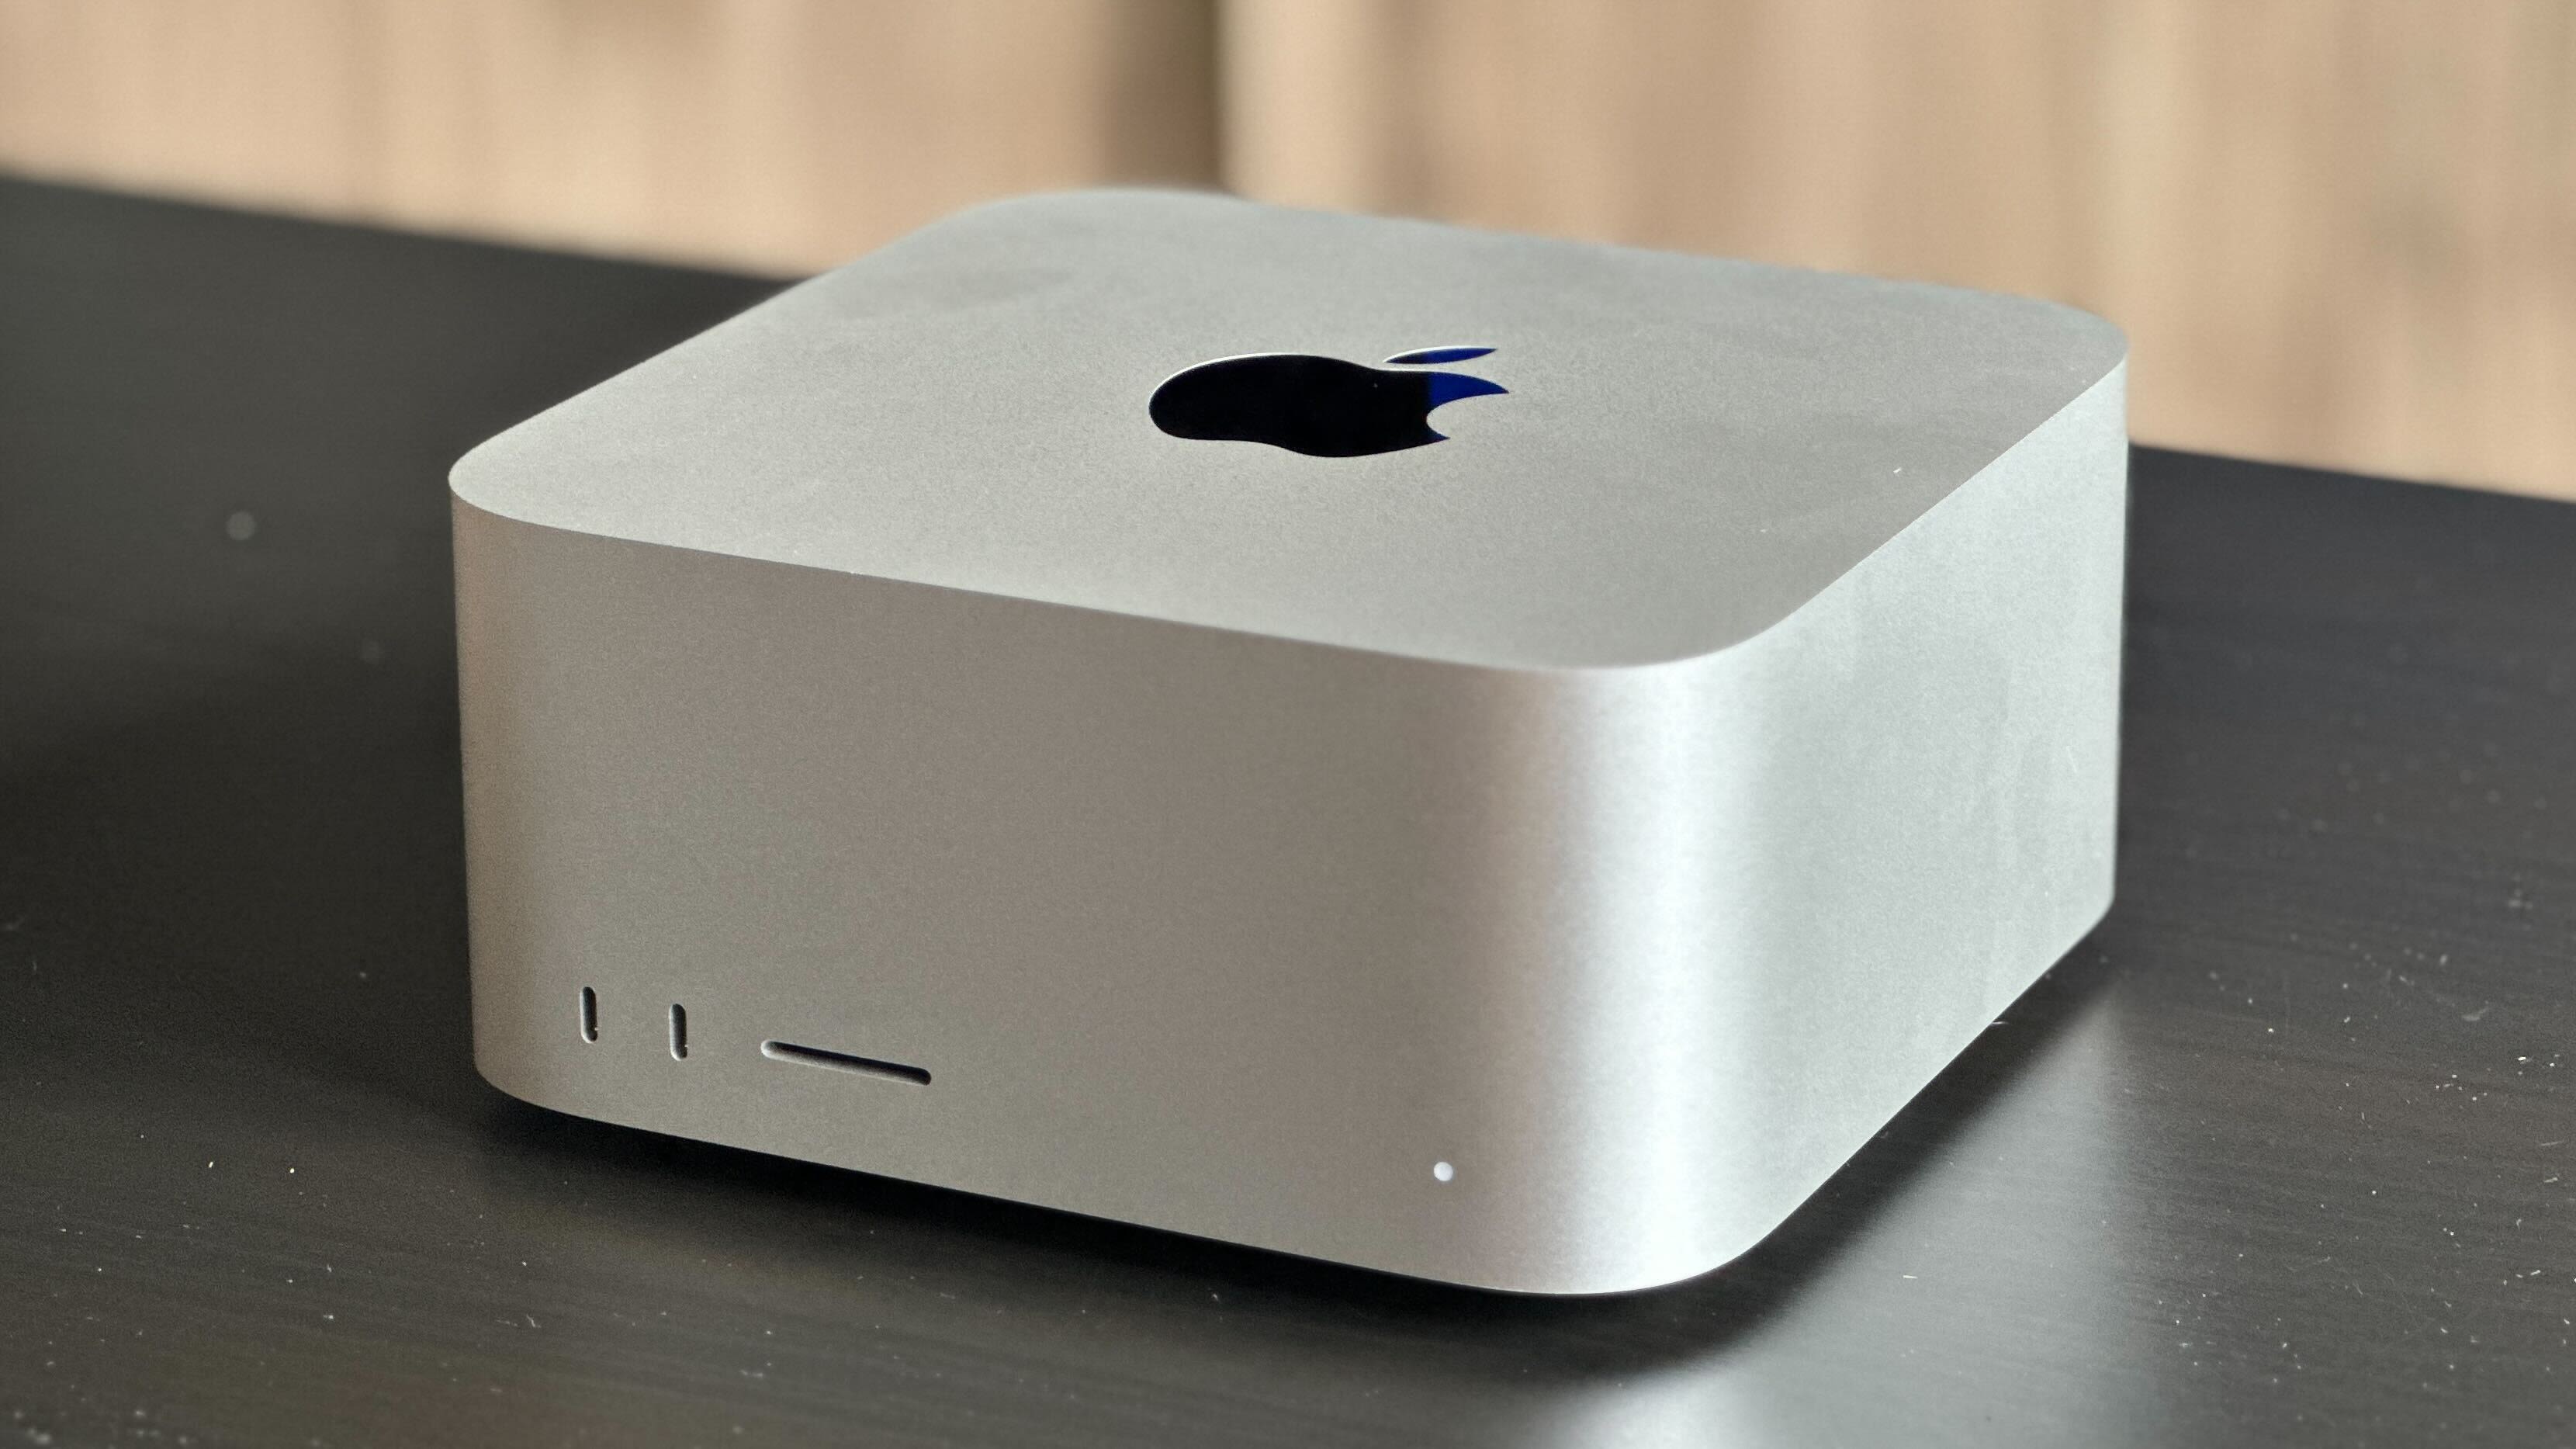 Apple Mac Studio 2023 (M2 Max) review: All the computing power a